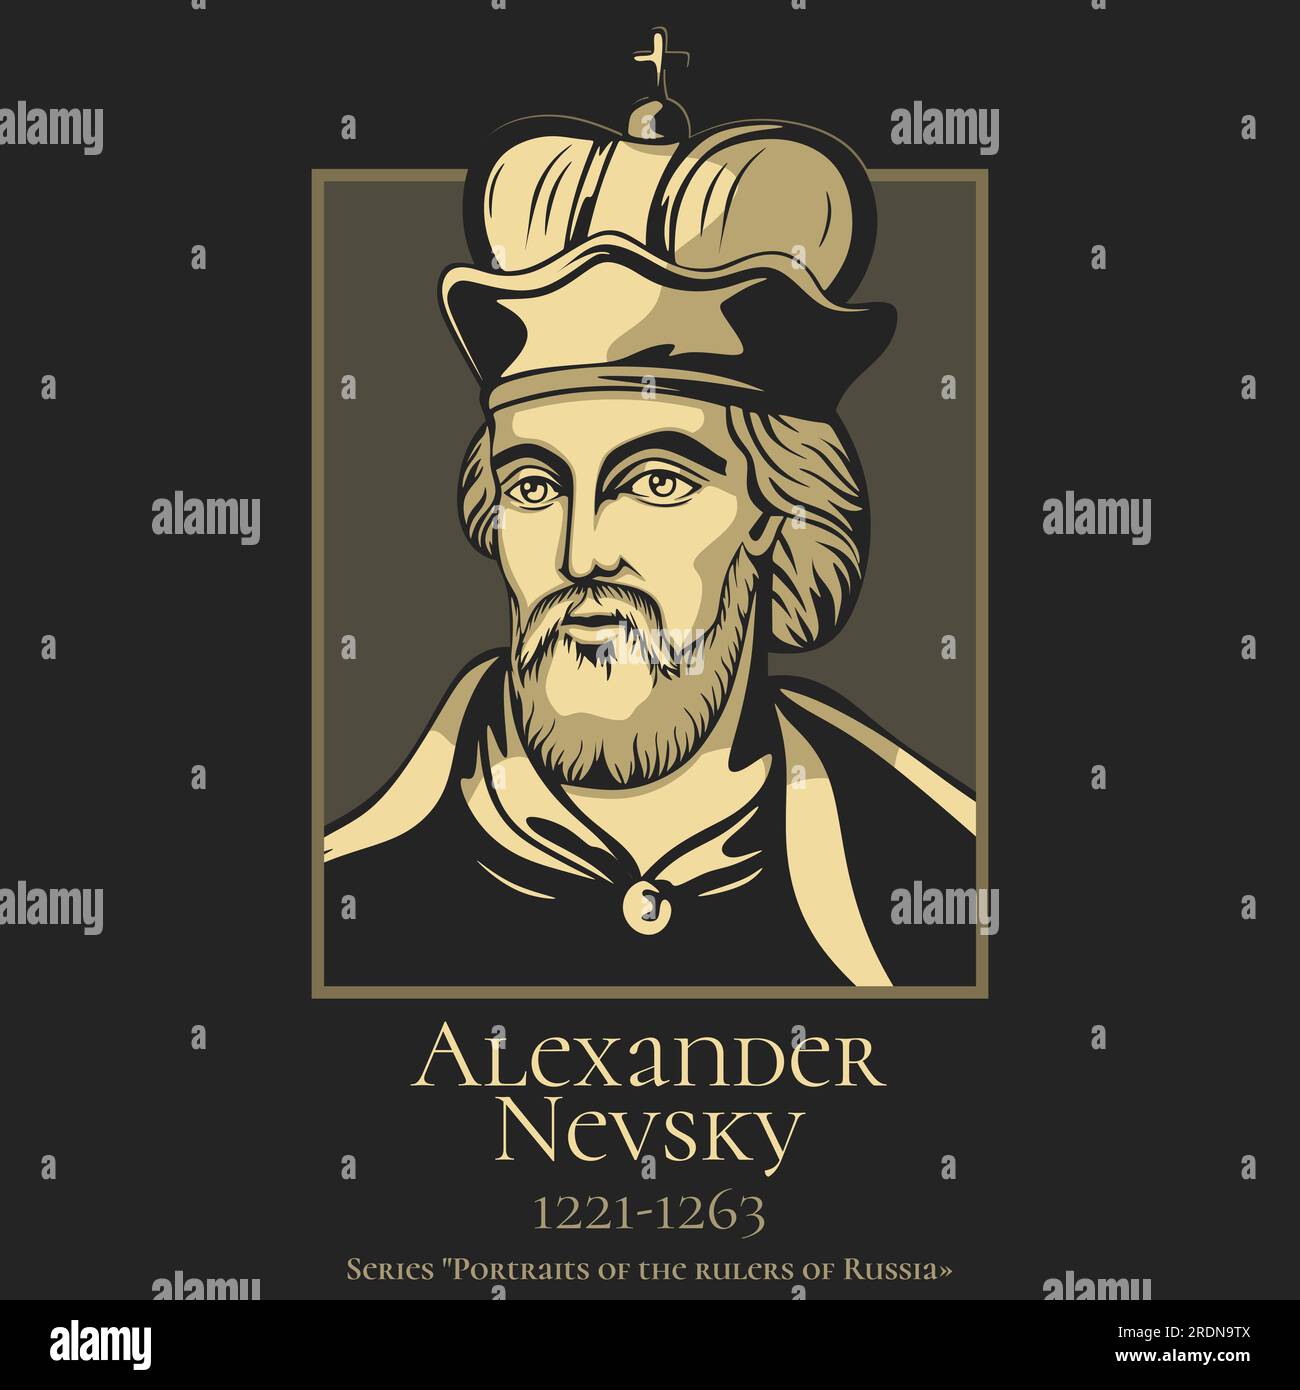 Portrait of the rulers of Russia. Alexander Nevsky (1221-1263) served as Prince of Novgorod, Grand Prince of Kiev and Grand Prince of Vladimir during Stock Vector